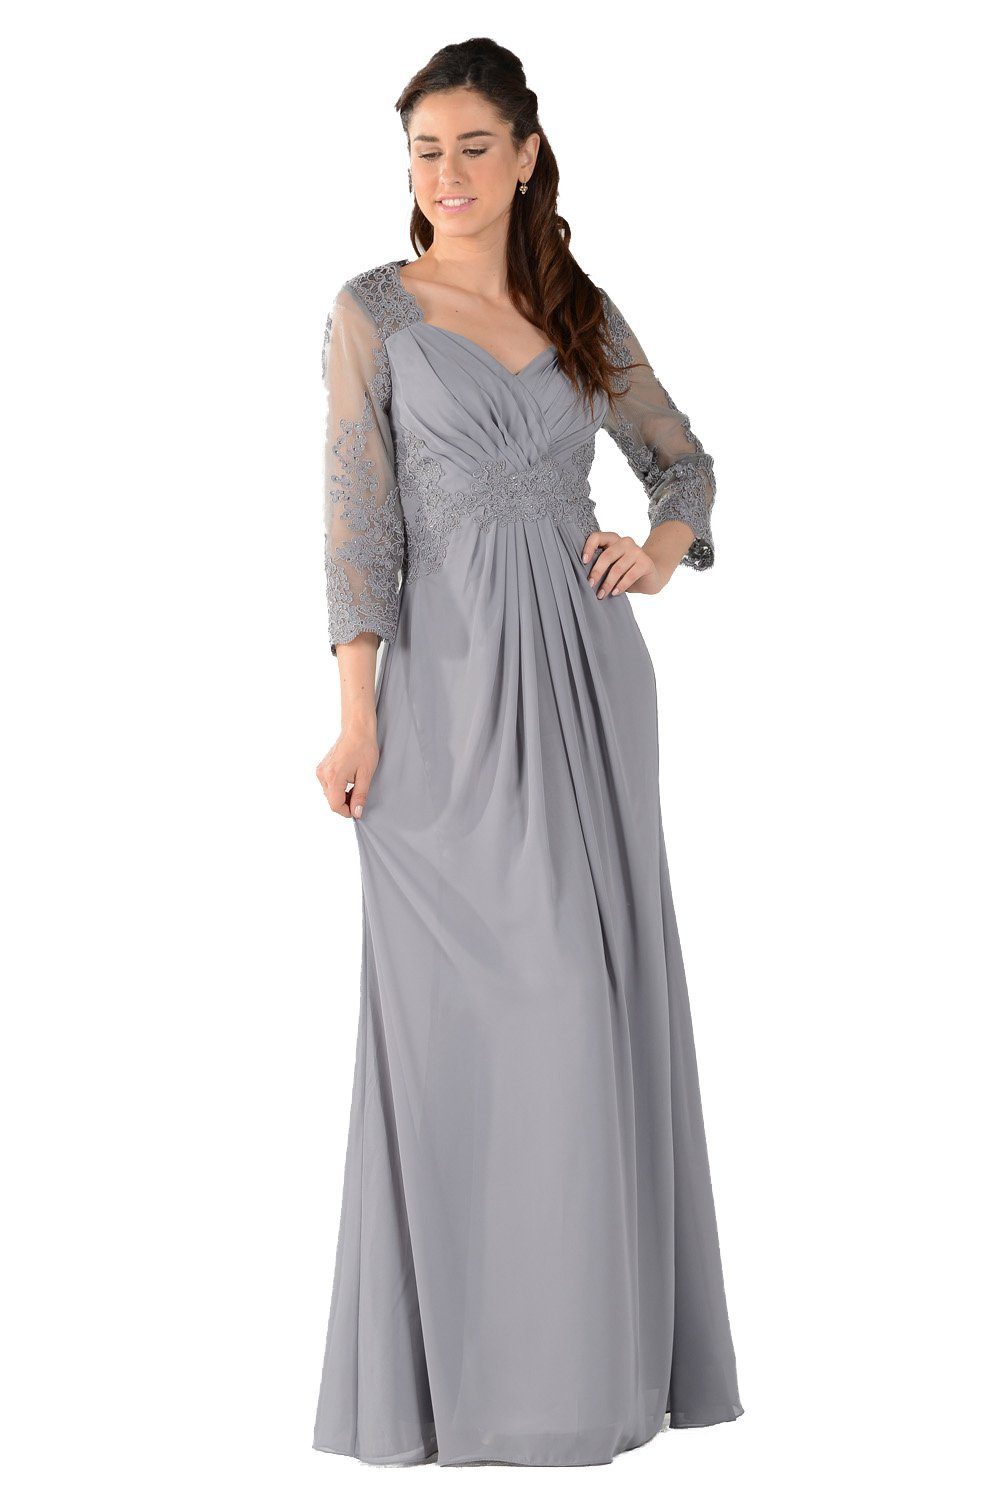 Long Lace Applique Pleated Dress with Sleeves by Poly USA-Long Formal Dresses-ABC Fashion